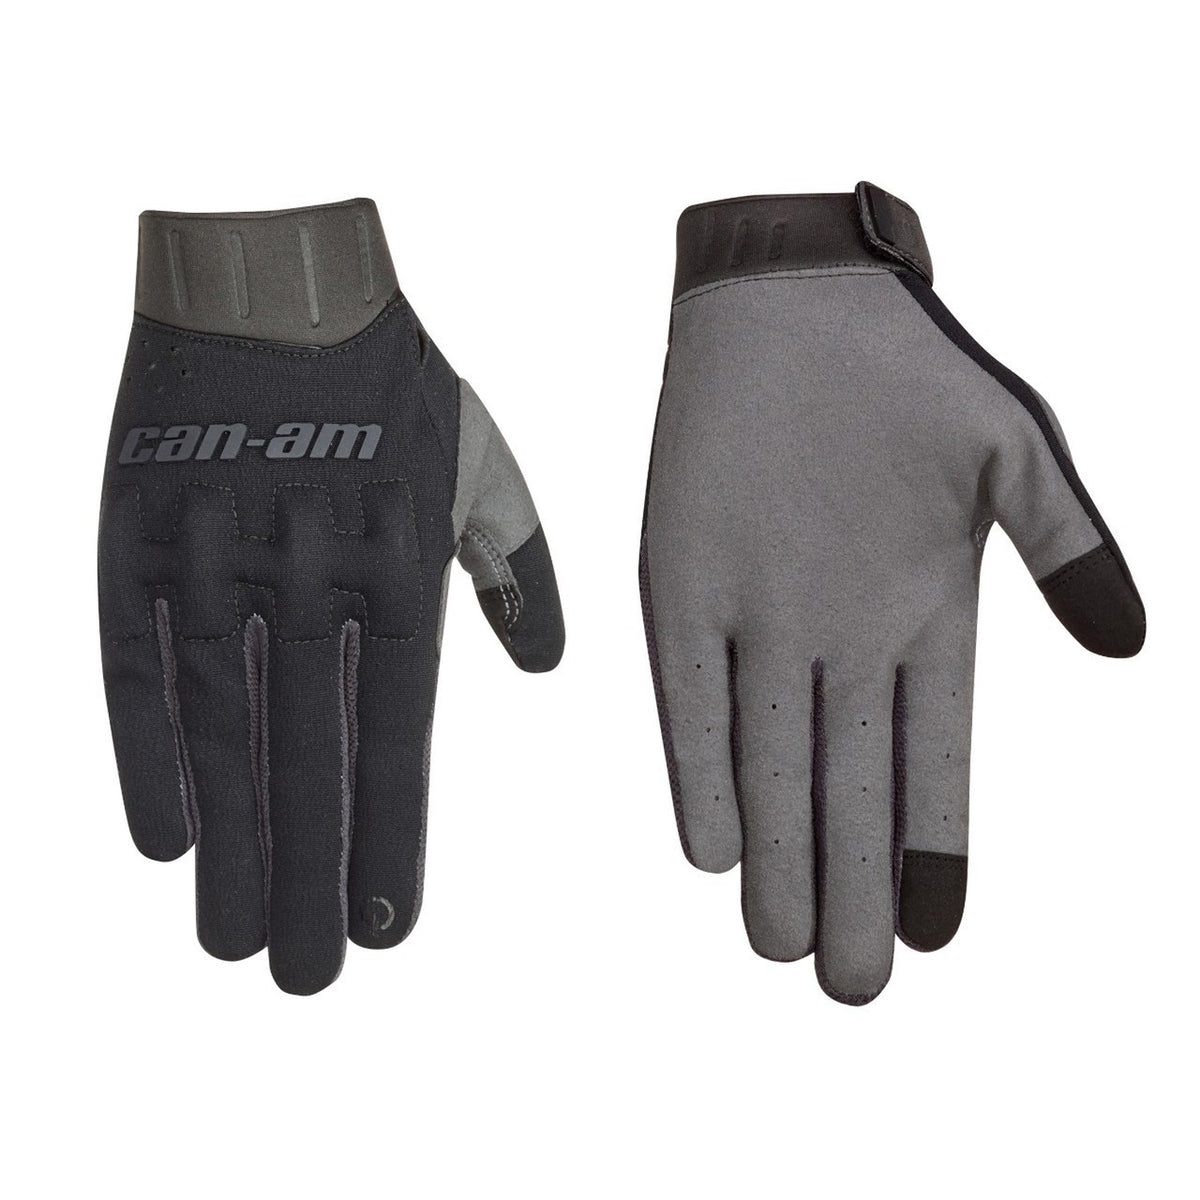 Can-am Smart Touch, Vented, Recoil Gloves